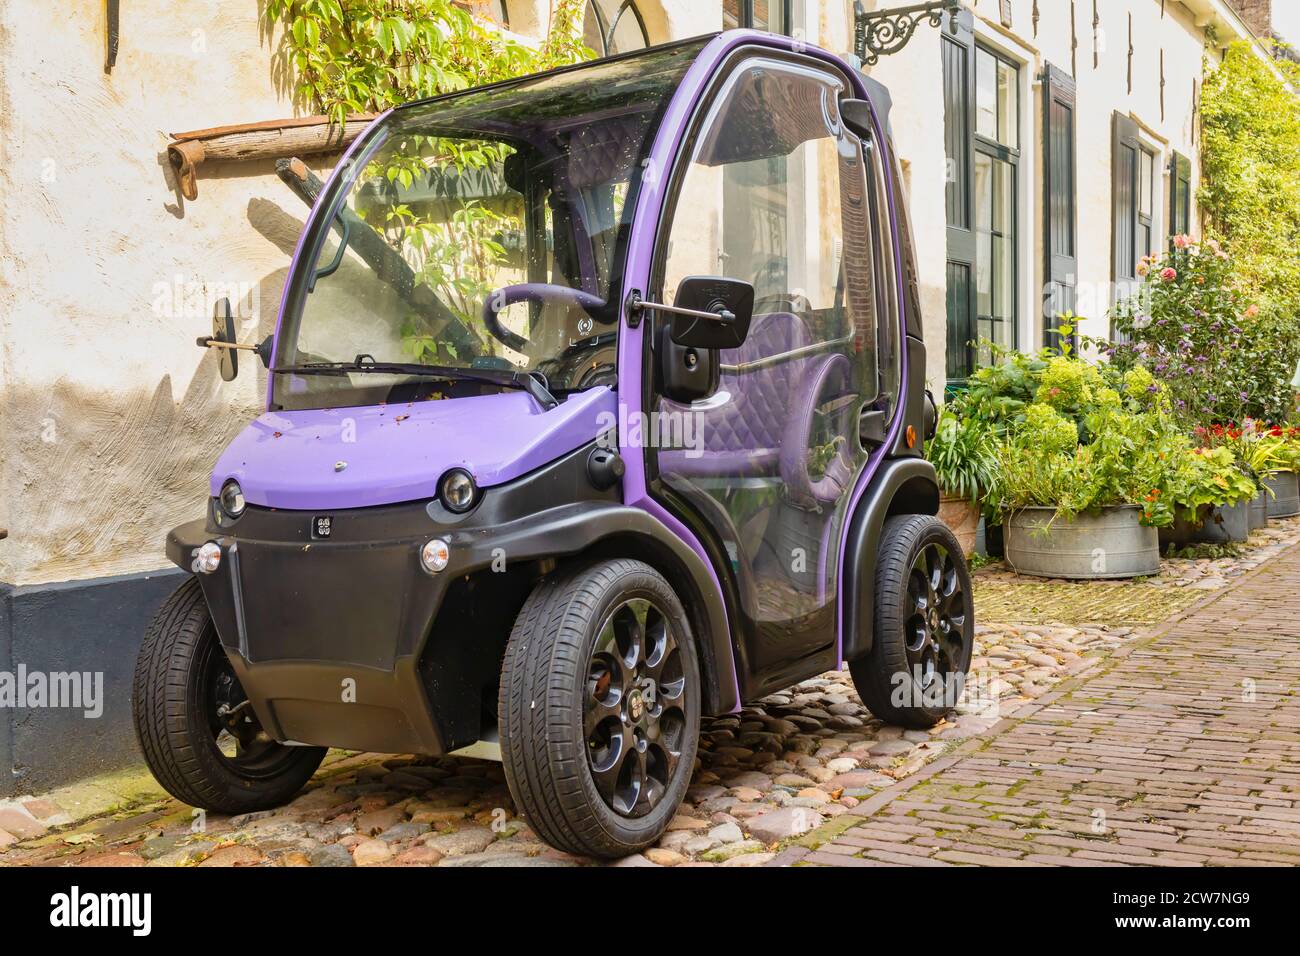 Elburg, The Netherlands - August 27, 2020: Small two person full electric mini car Biro parked in the Dutch city of Elburg, The Netherlands Stock Photo